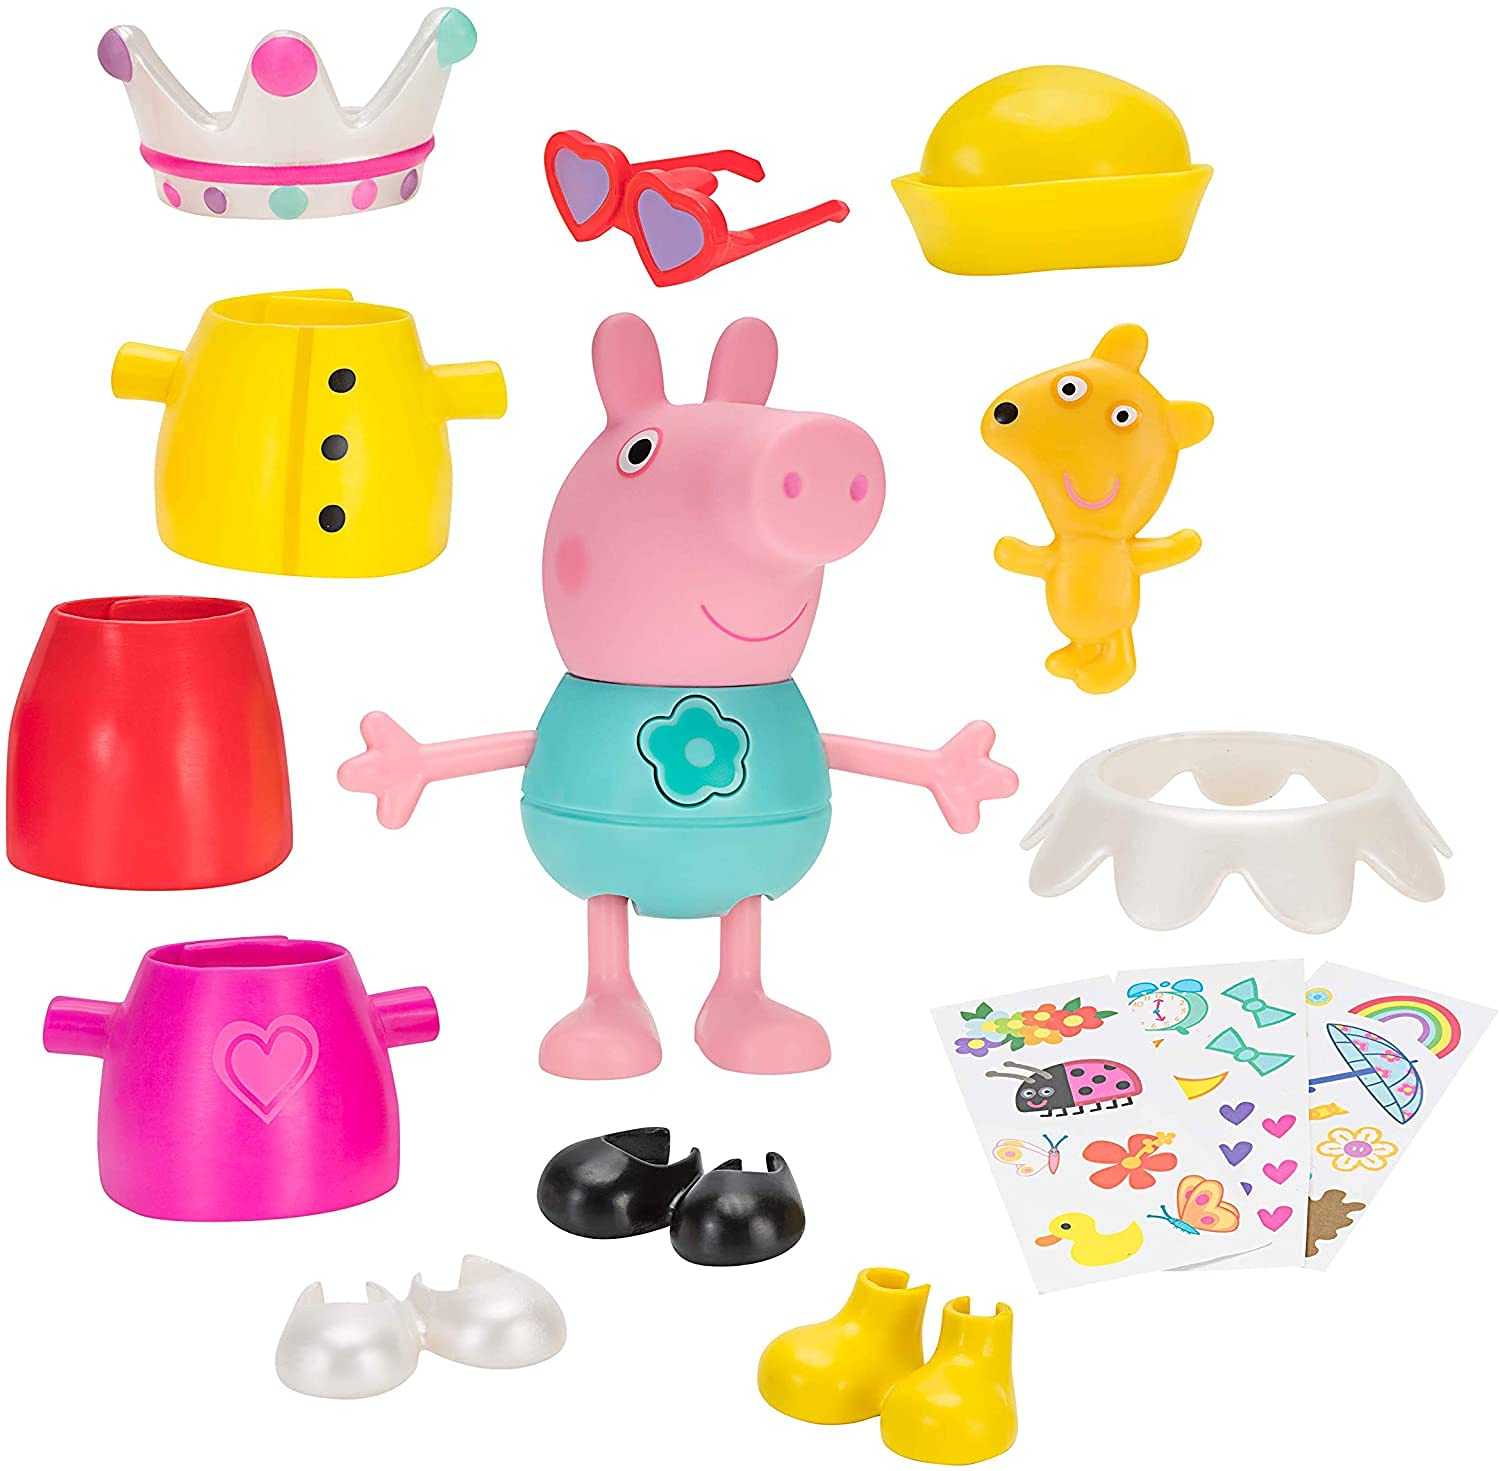 Peppa Pig Dress & Talk Figure Set, 12 Pieces - Includes Large Talking Peppa Figure with 4 Outfits & Accessories - Toy Gift for Kids - Ages 3+